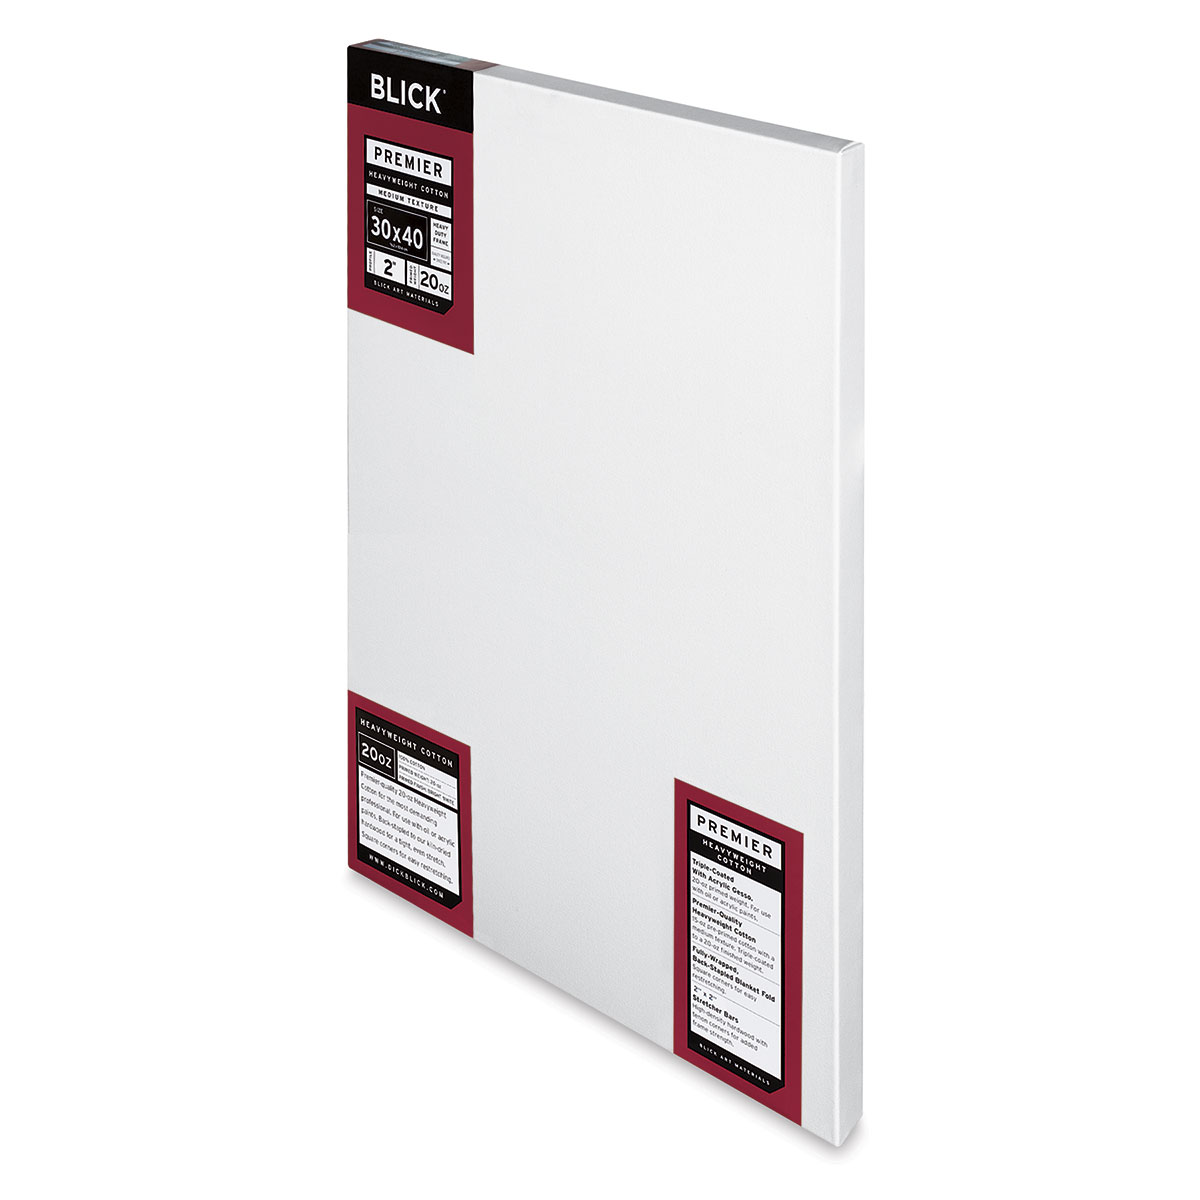 Blick Premier Heavyweight Stretched Cotton Canvas - 8 x 8, 1-3/8 Profile